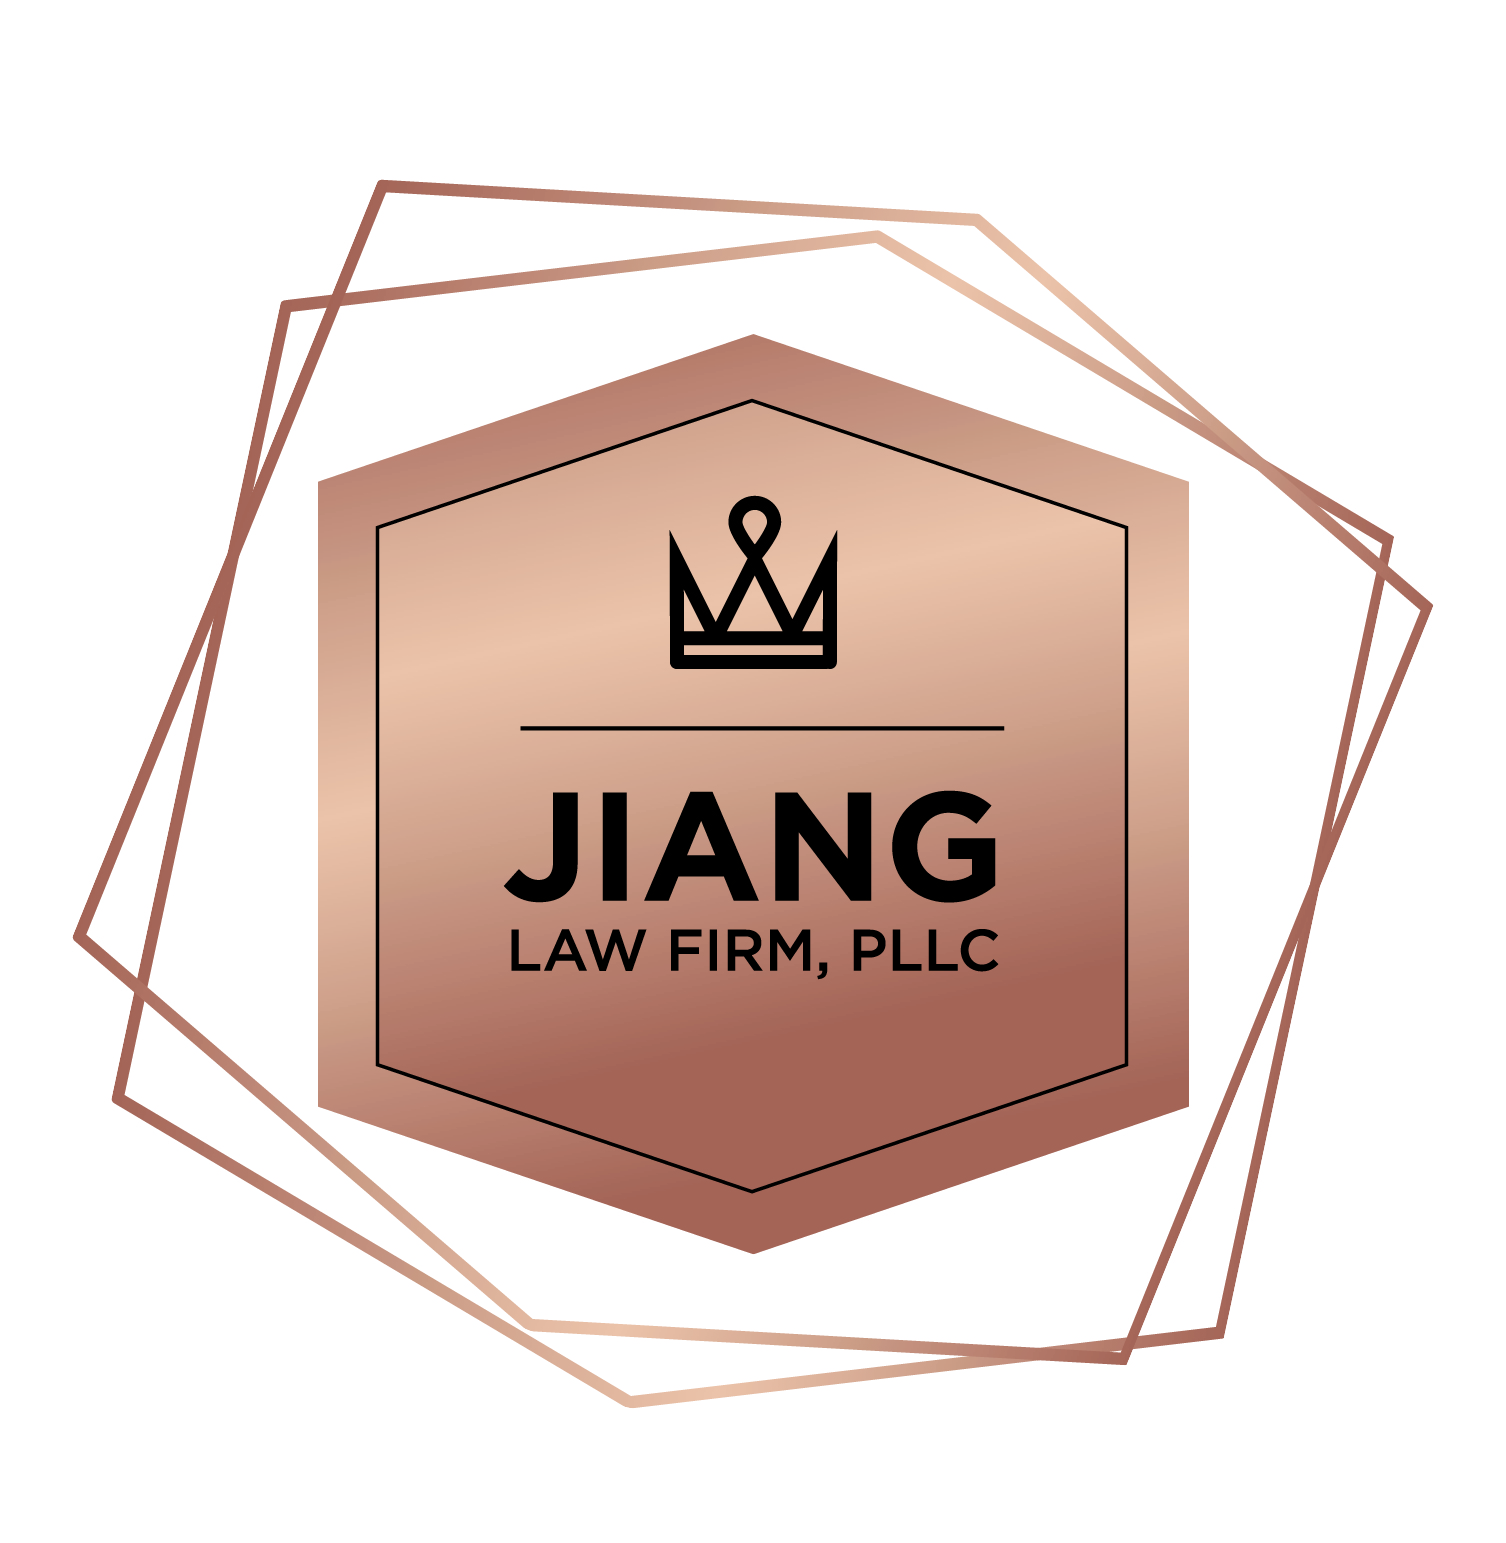 Jiang Law Firm